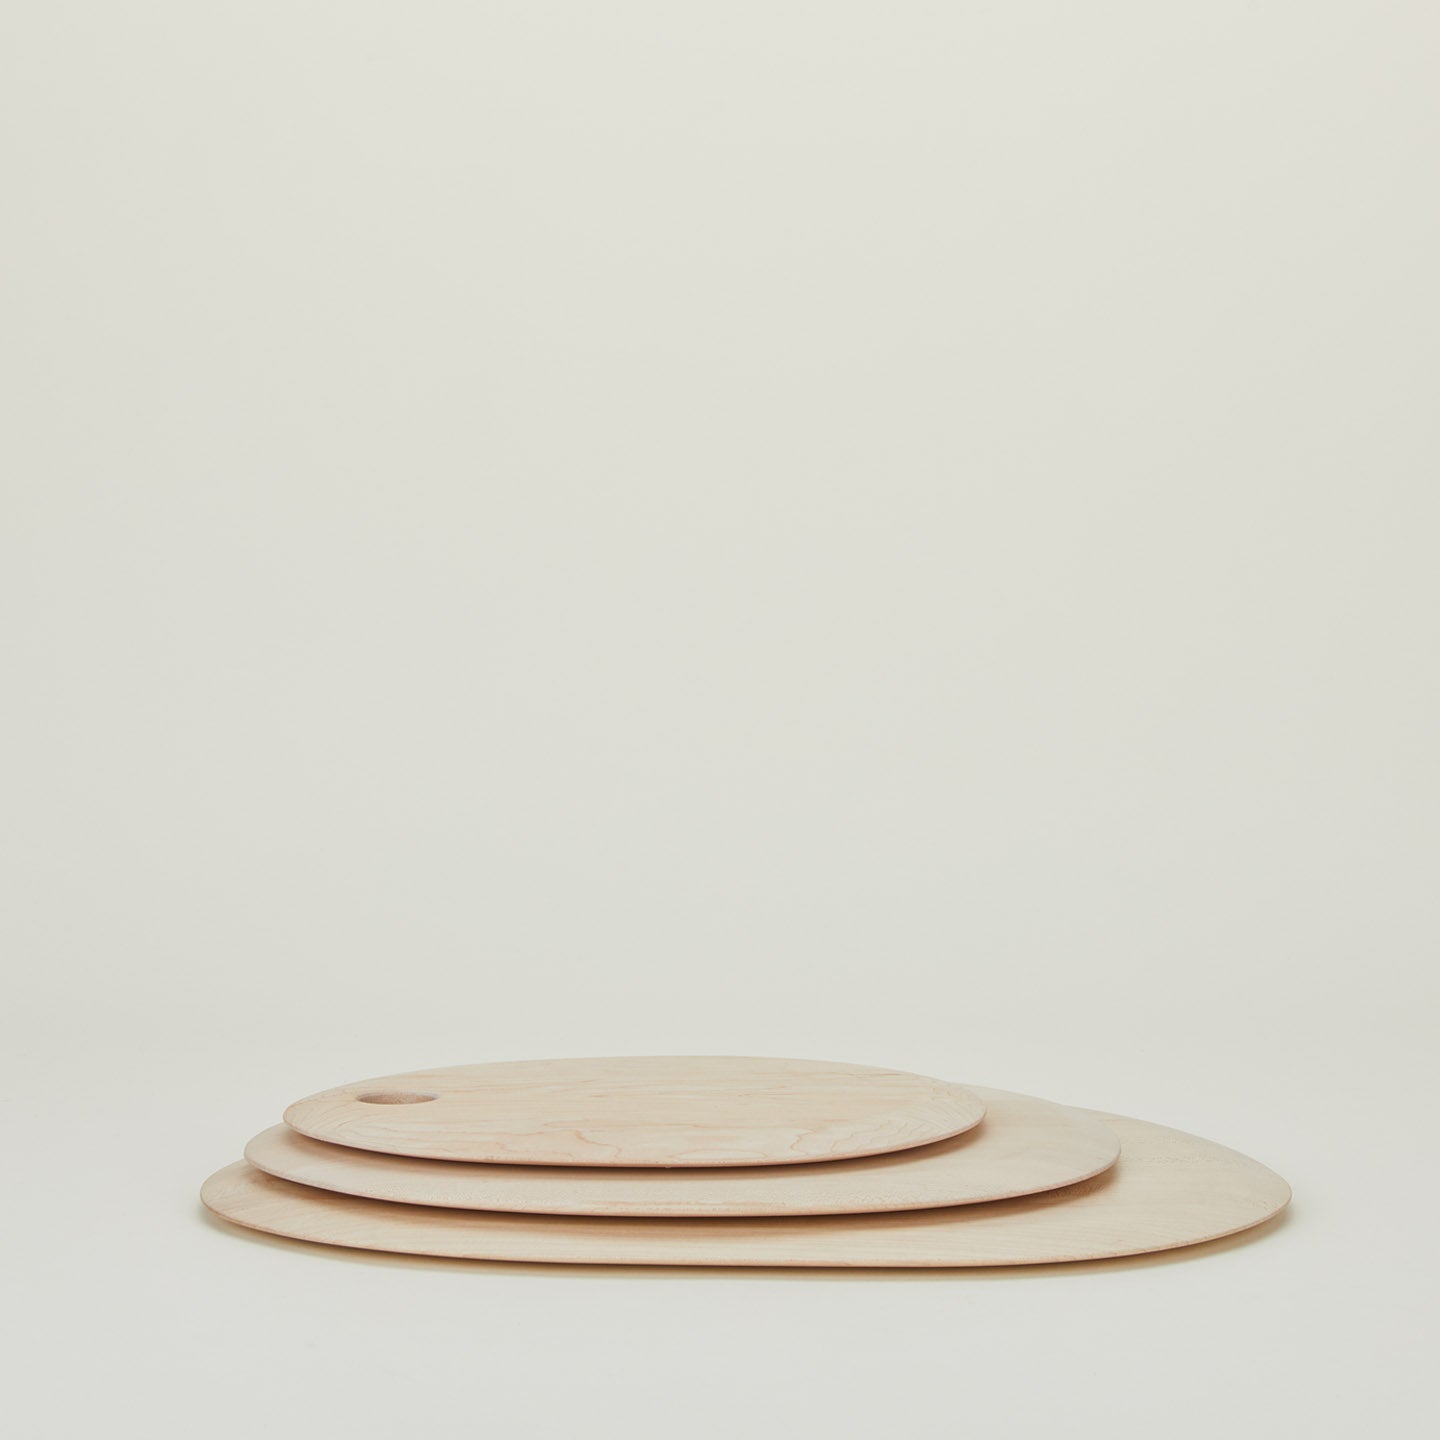 Handmade Maple Dinner Plates, Camping Cutting Boards